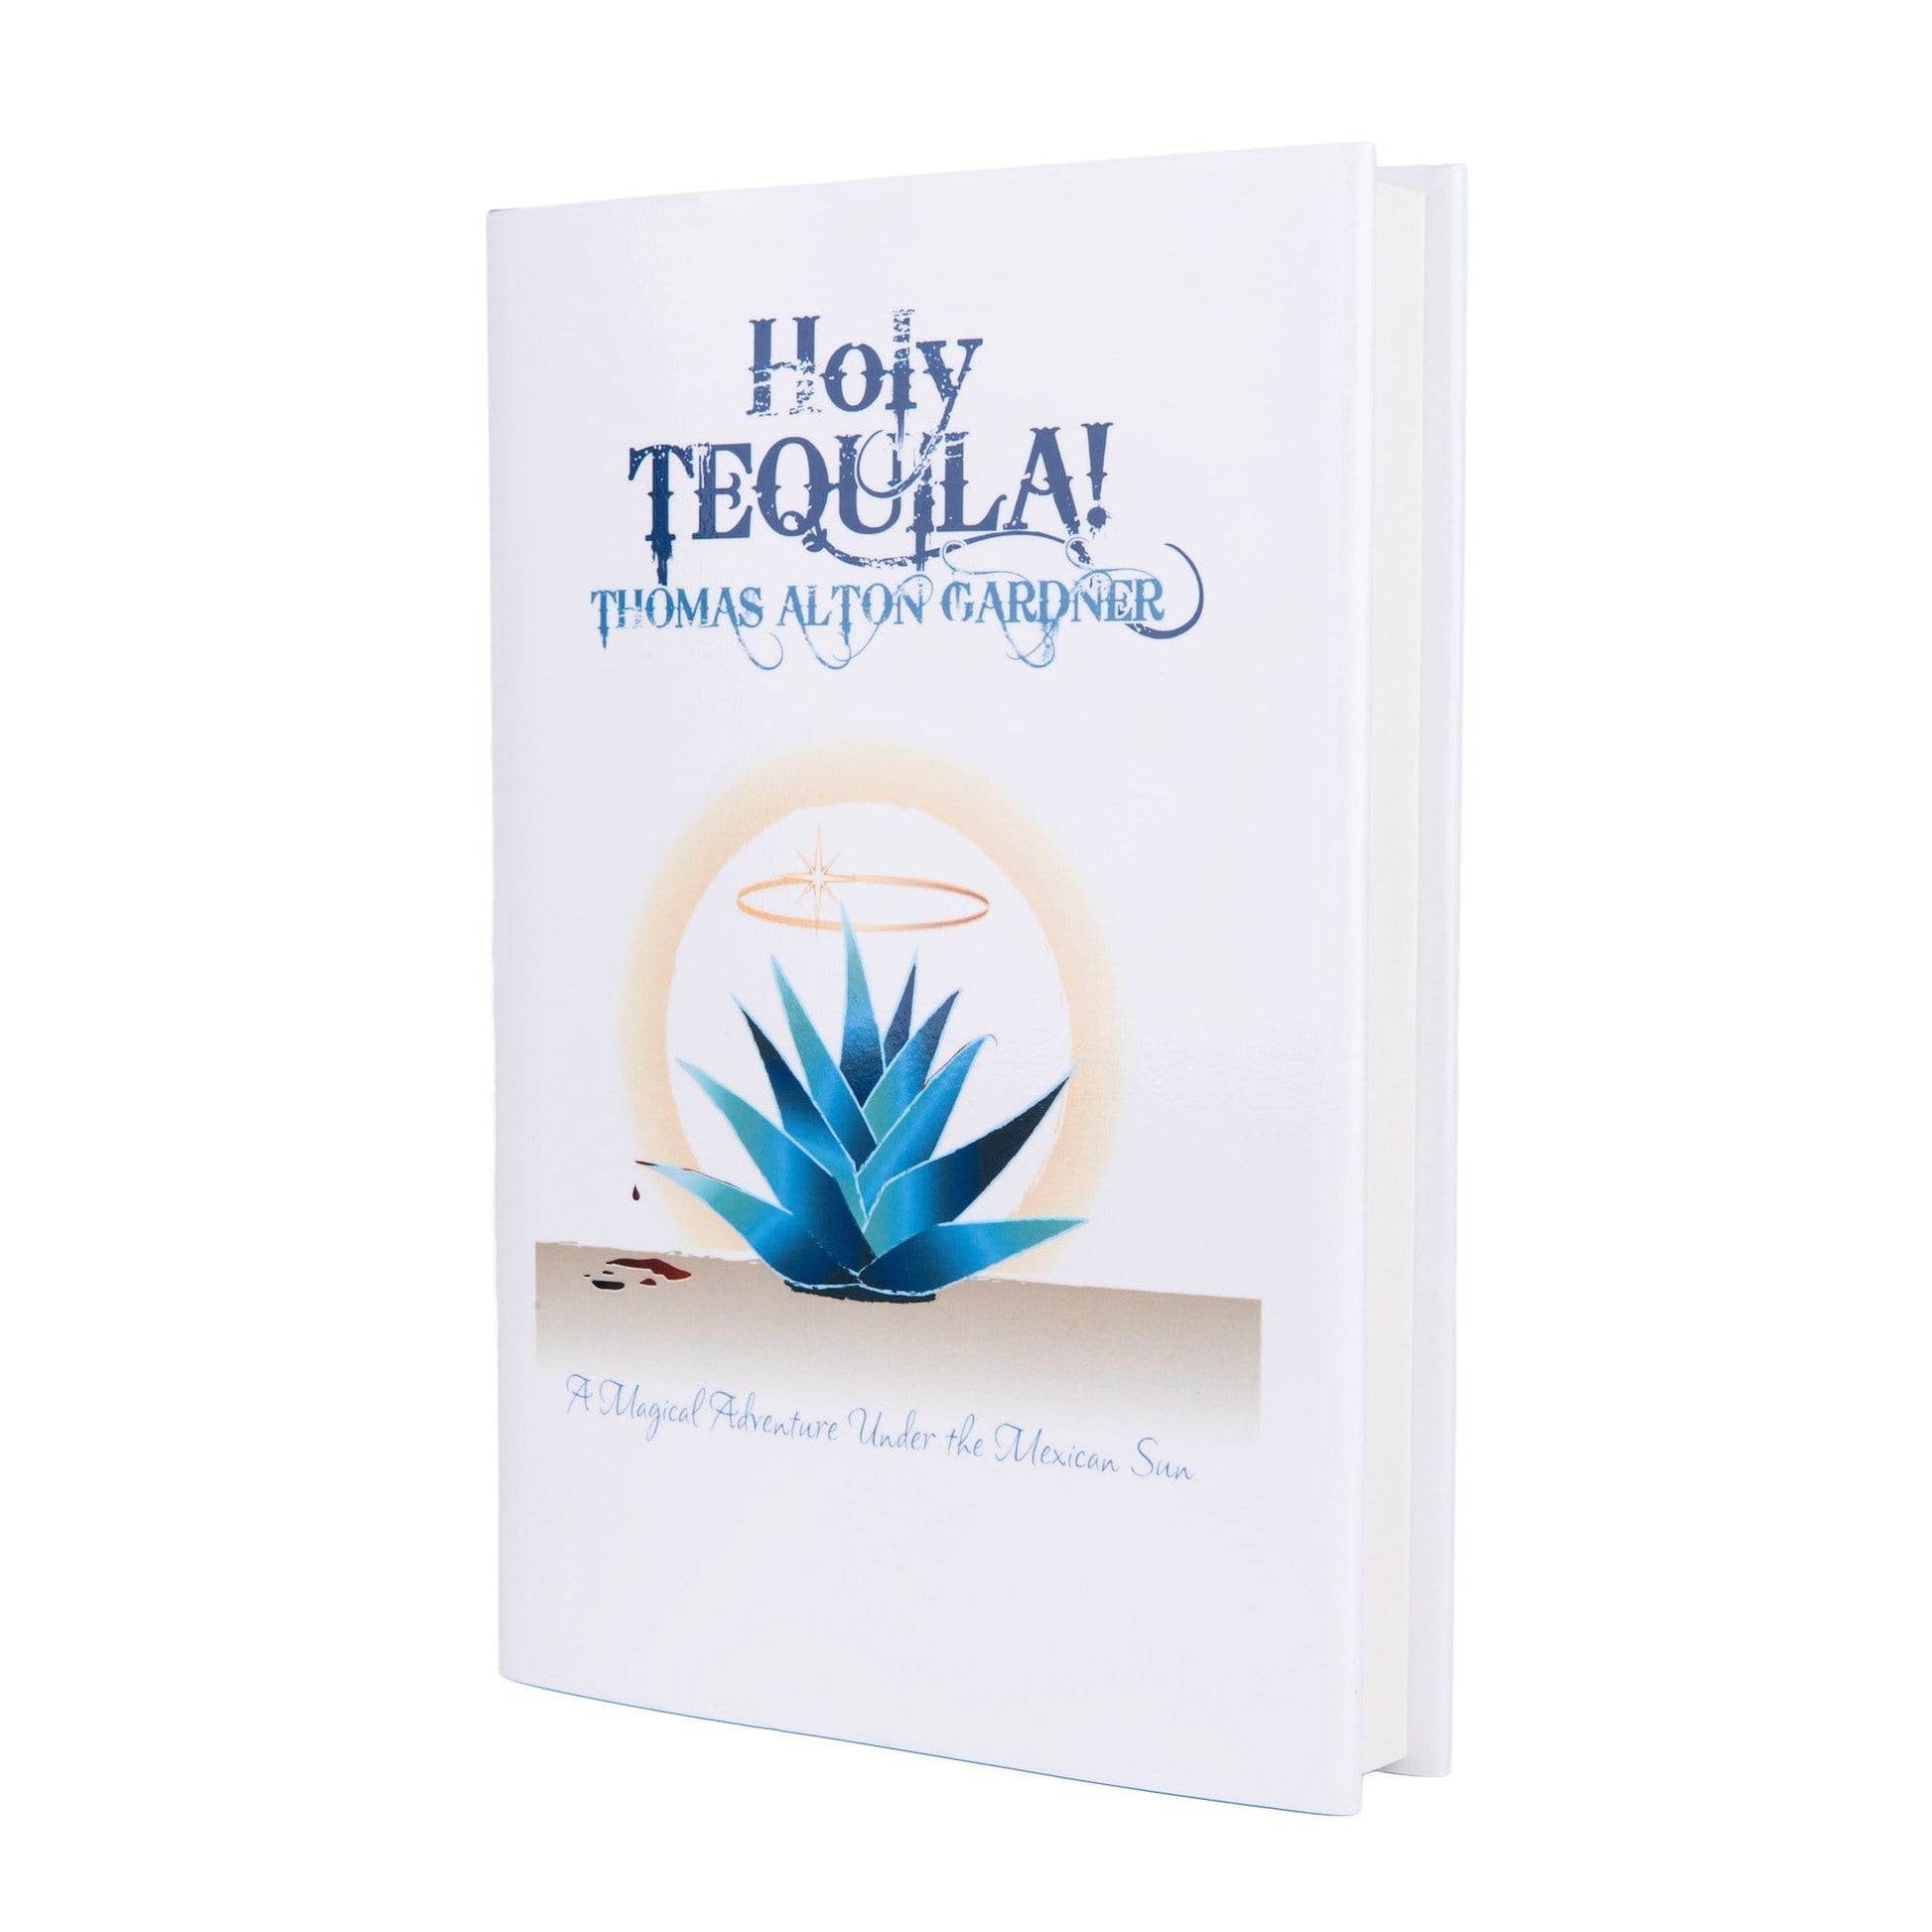 Holy Tequila!: A Magical Adventure Under the Mexican Sun - EC Proof